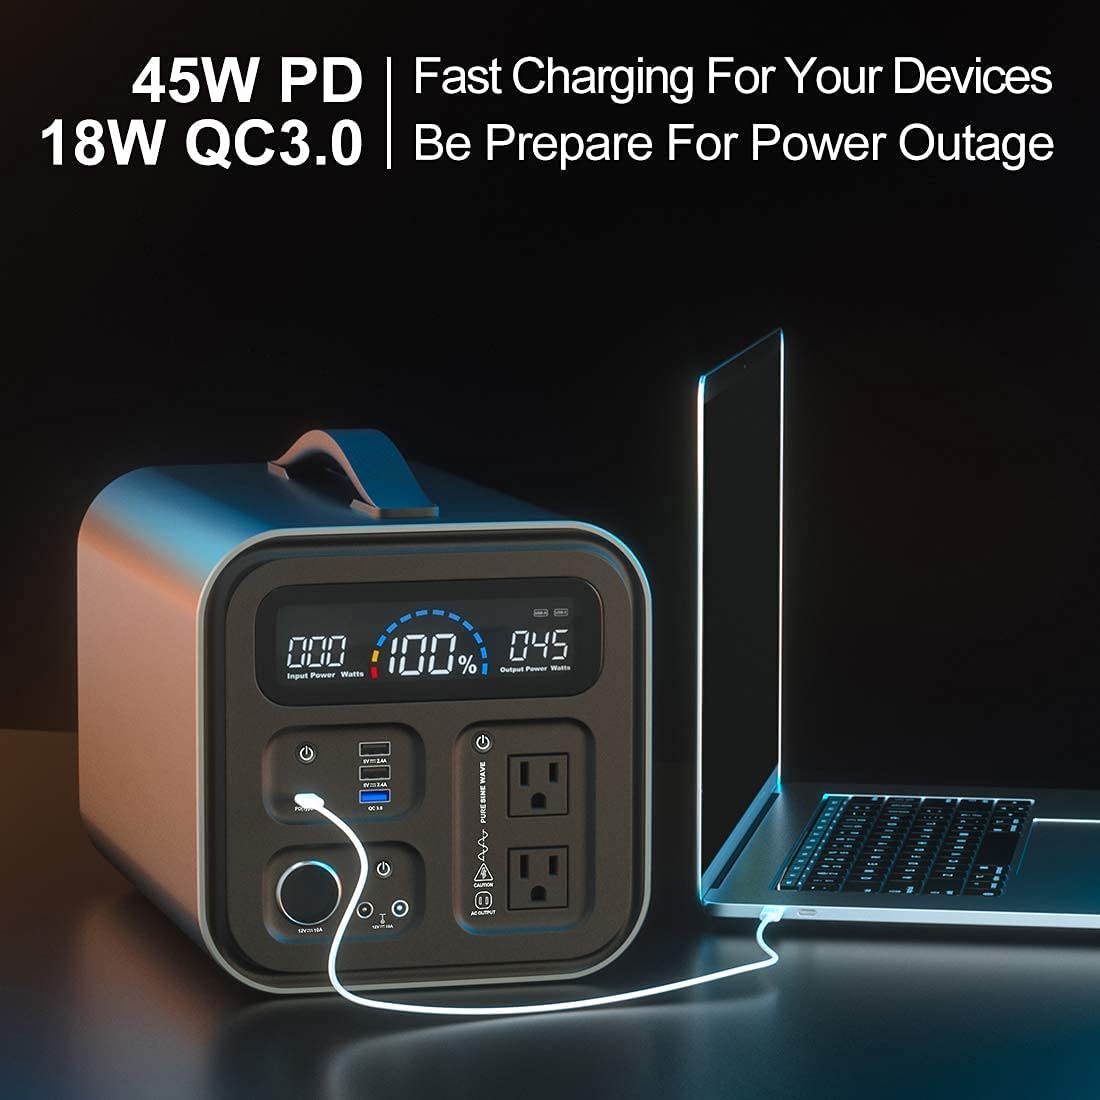 FF Flashfish UA1100, PD Fast Charging For Your Devices 18W QC3.